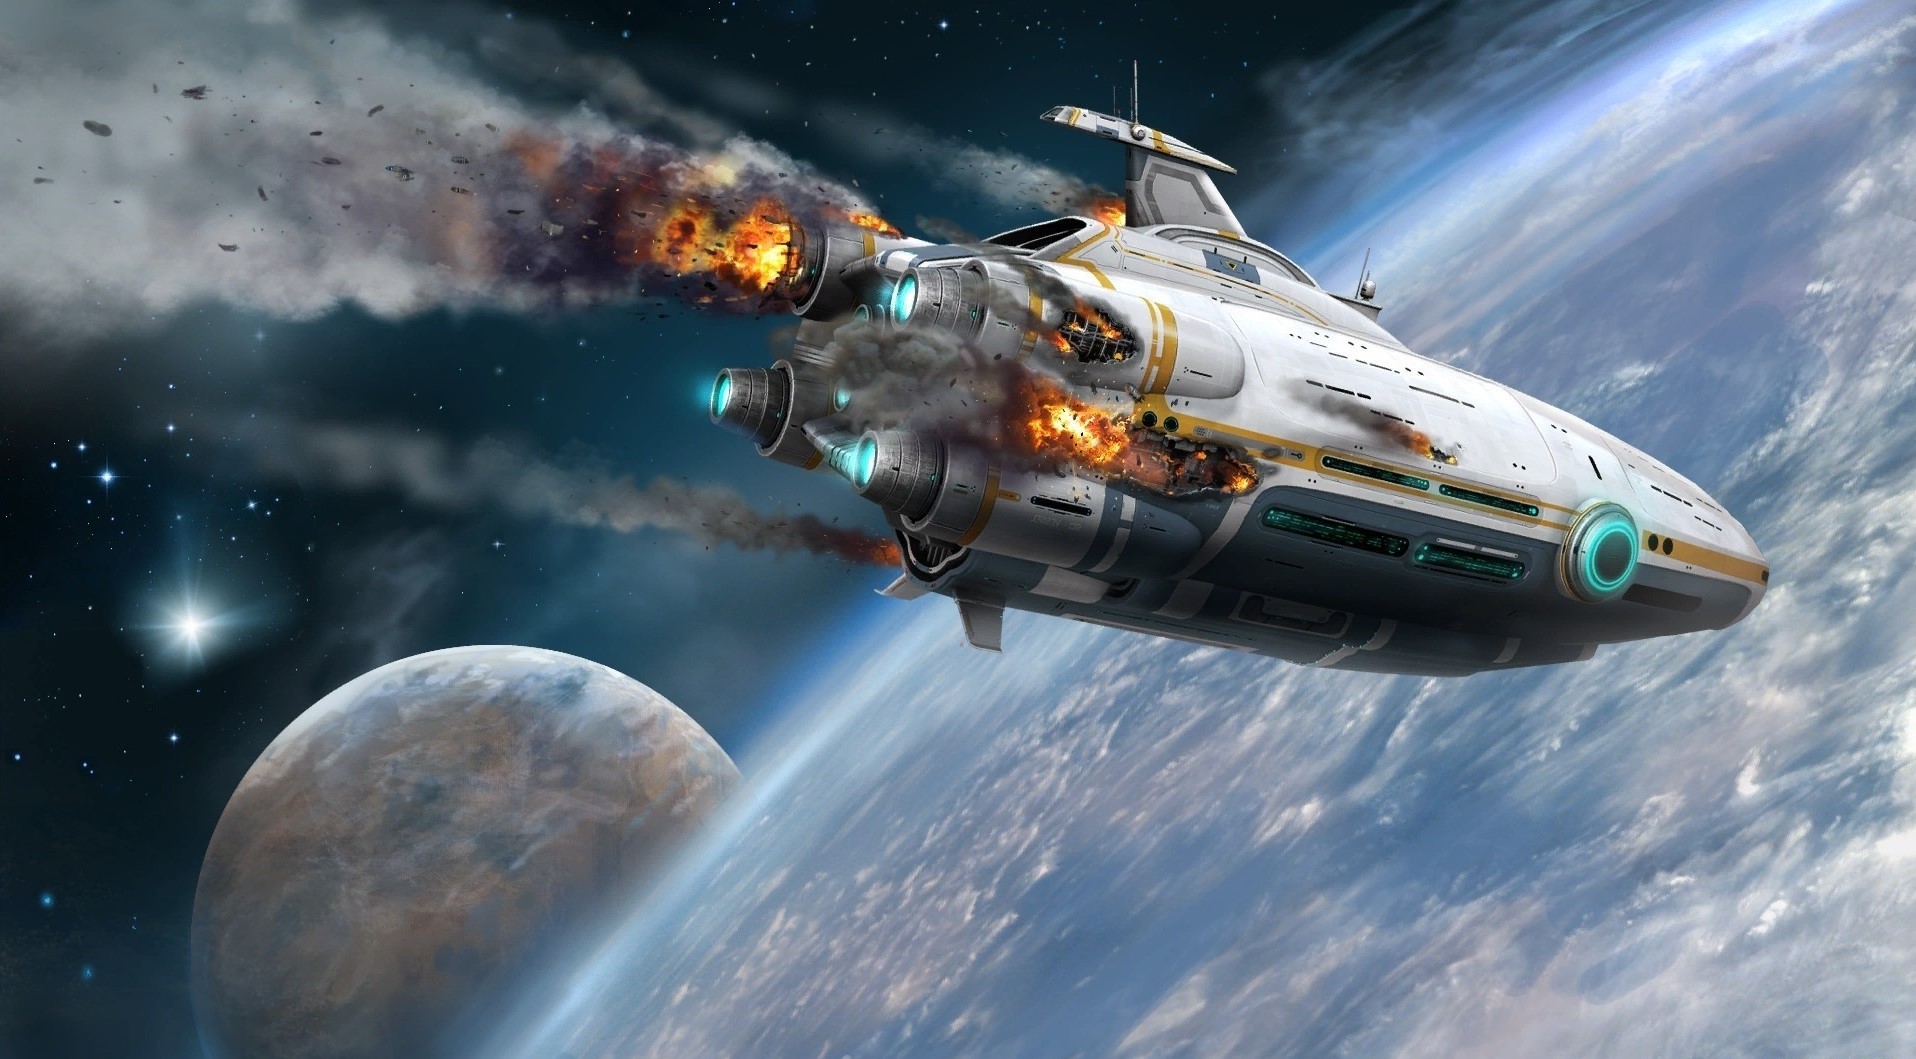 General 1916x1059 futuristic artwork science fiction spaceship subnautica space vehicle video games PC gaming video game art